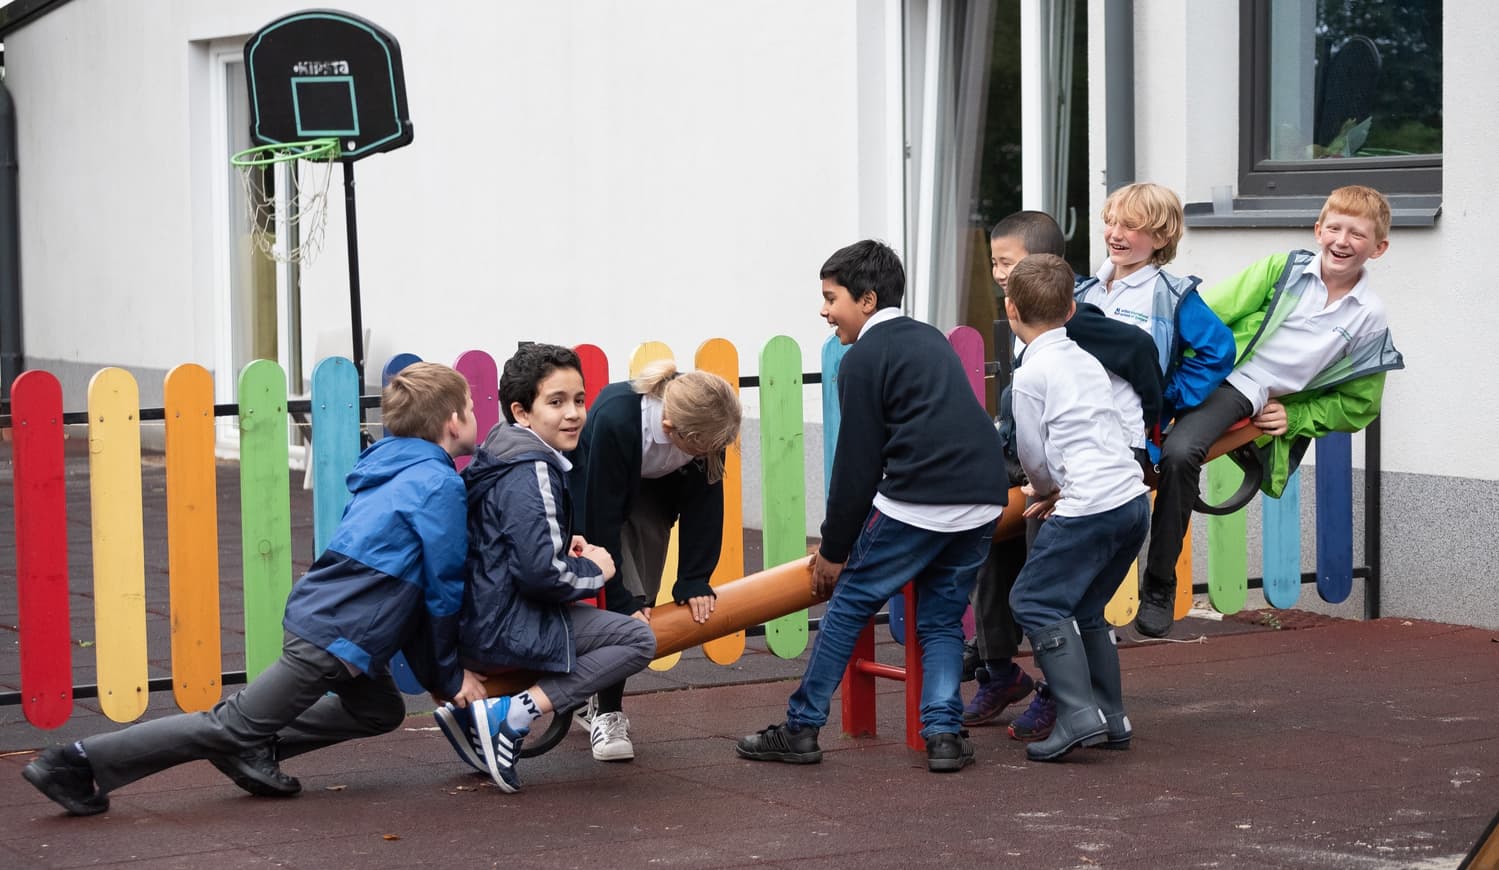 Students playing on playground in school